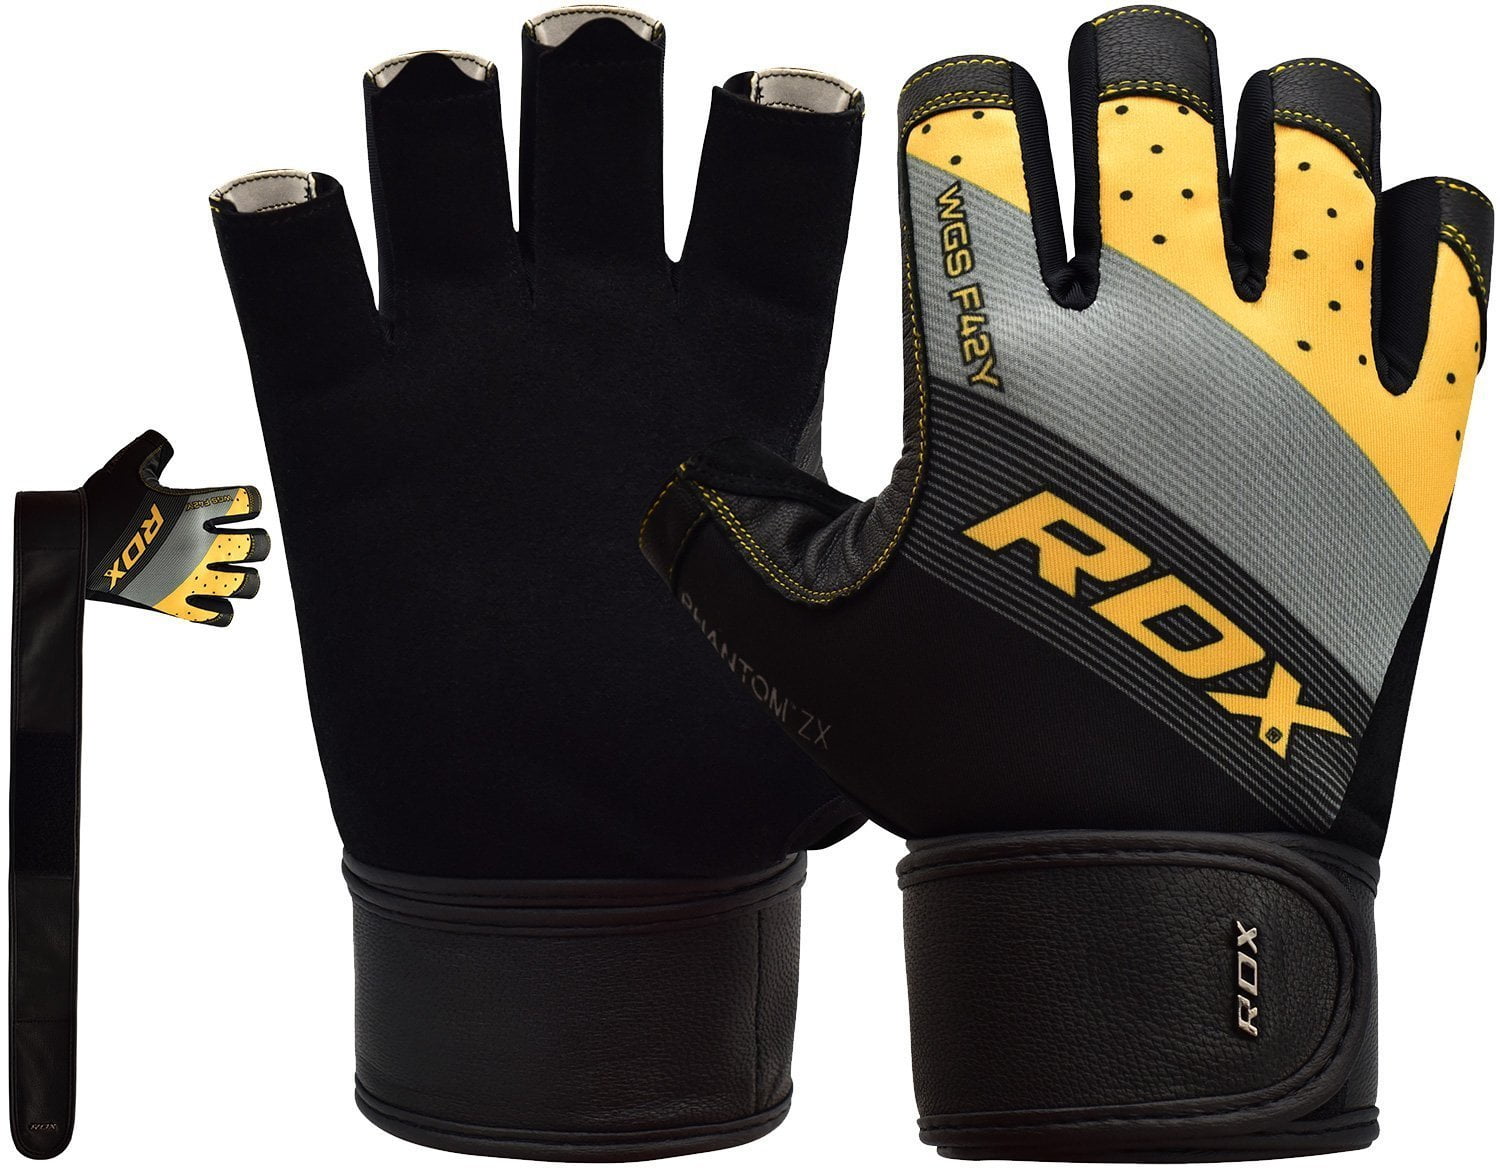 RDX Weight Lifting Body Building Gym Training Fitness Gloves Straps Leather New 